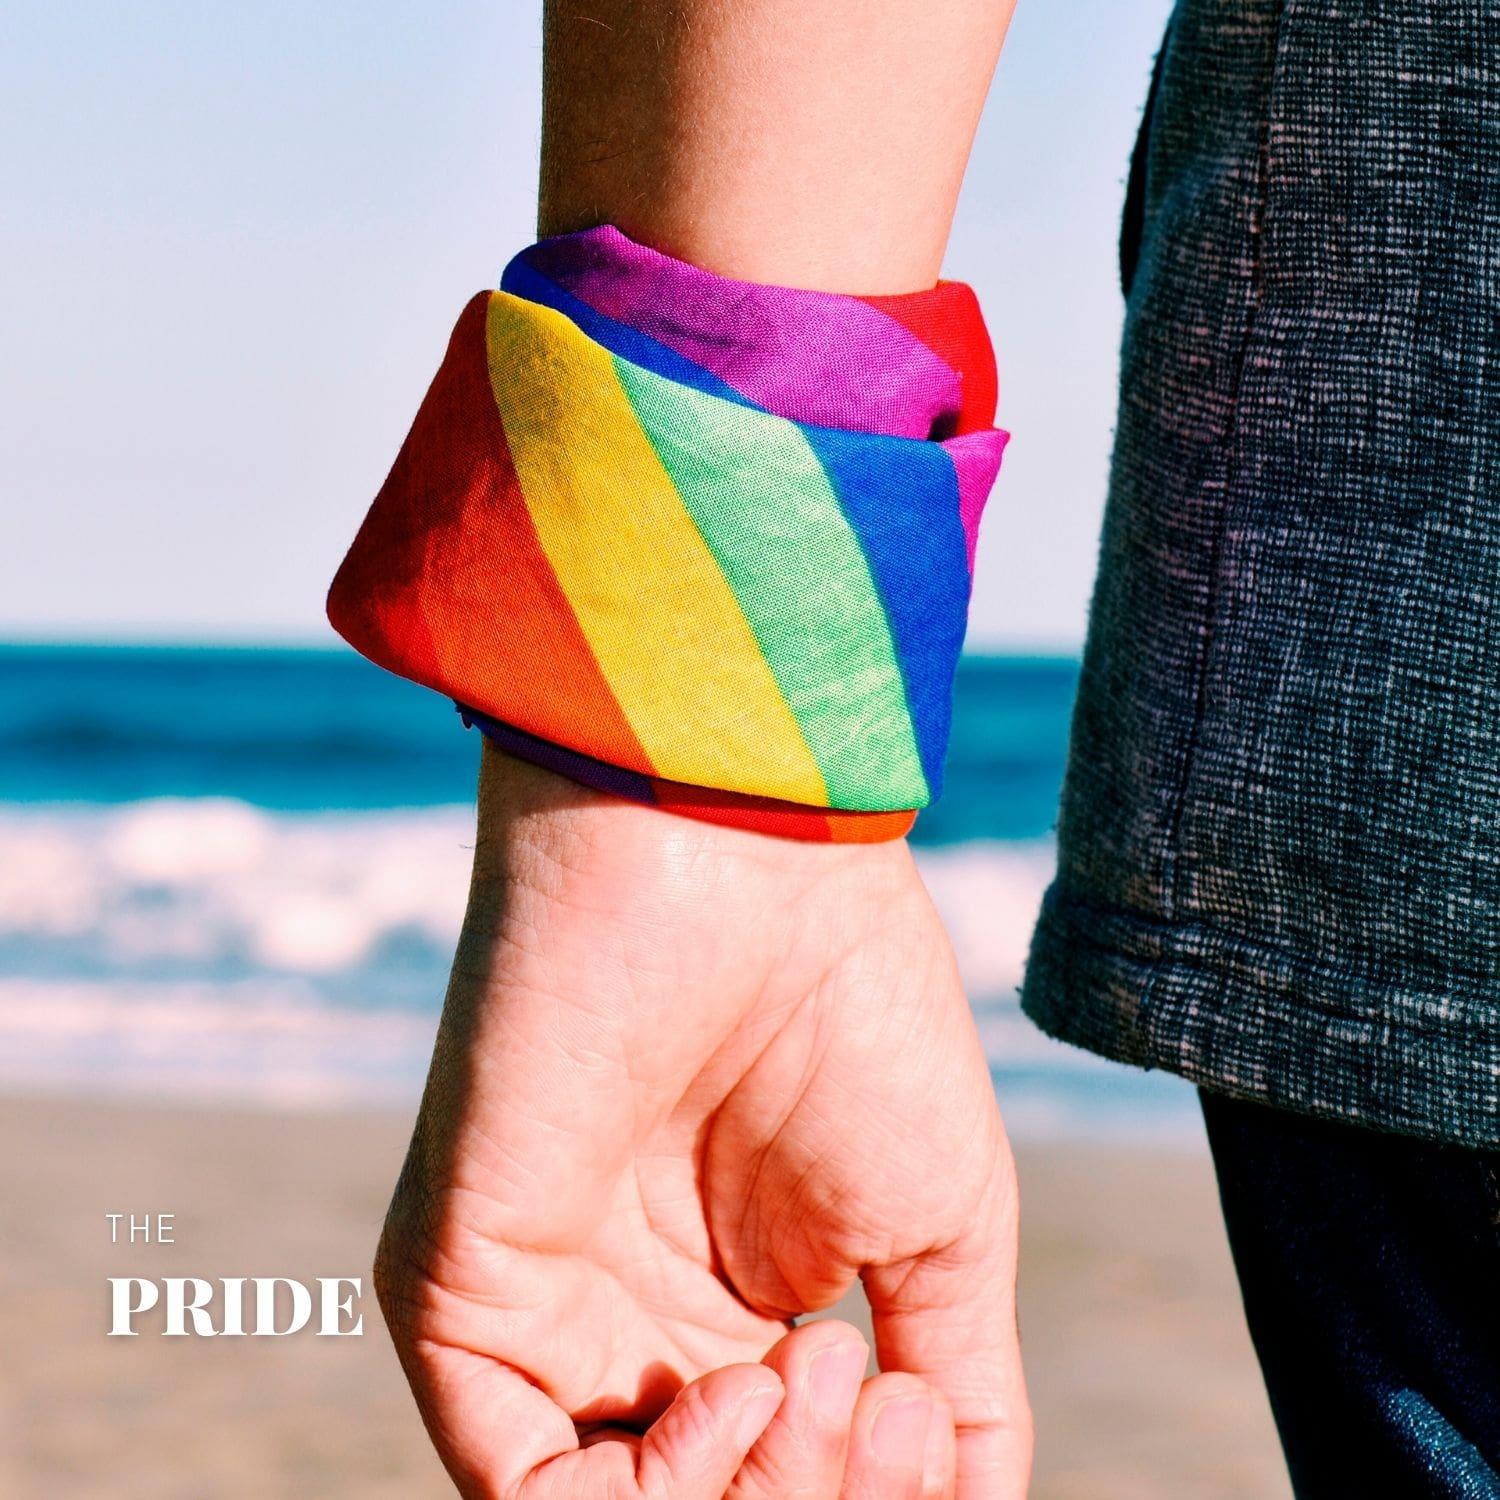 Picturesque scene featuring a hand with a TOMSCOUT LGBT rainbow pride bandana at the seaside. Ideal for Singapore's LGBT community, this image evokes a sense of peace and pride, perfectly blending the beauty of nature with the spirit of LGBT inclusivity.